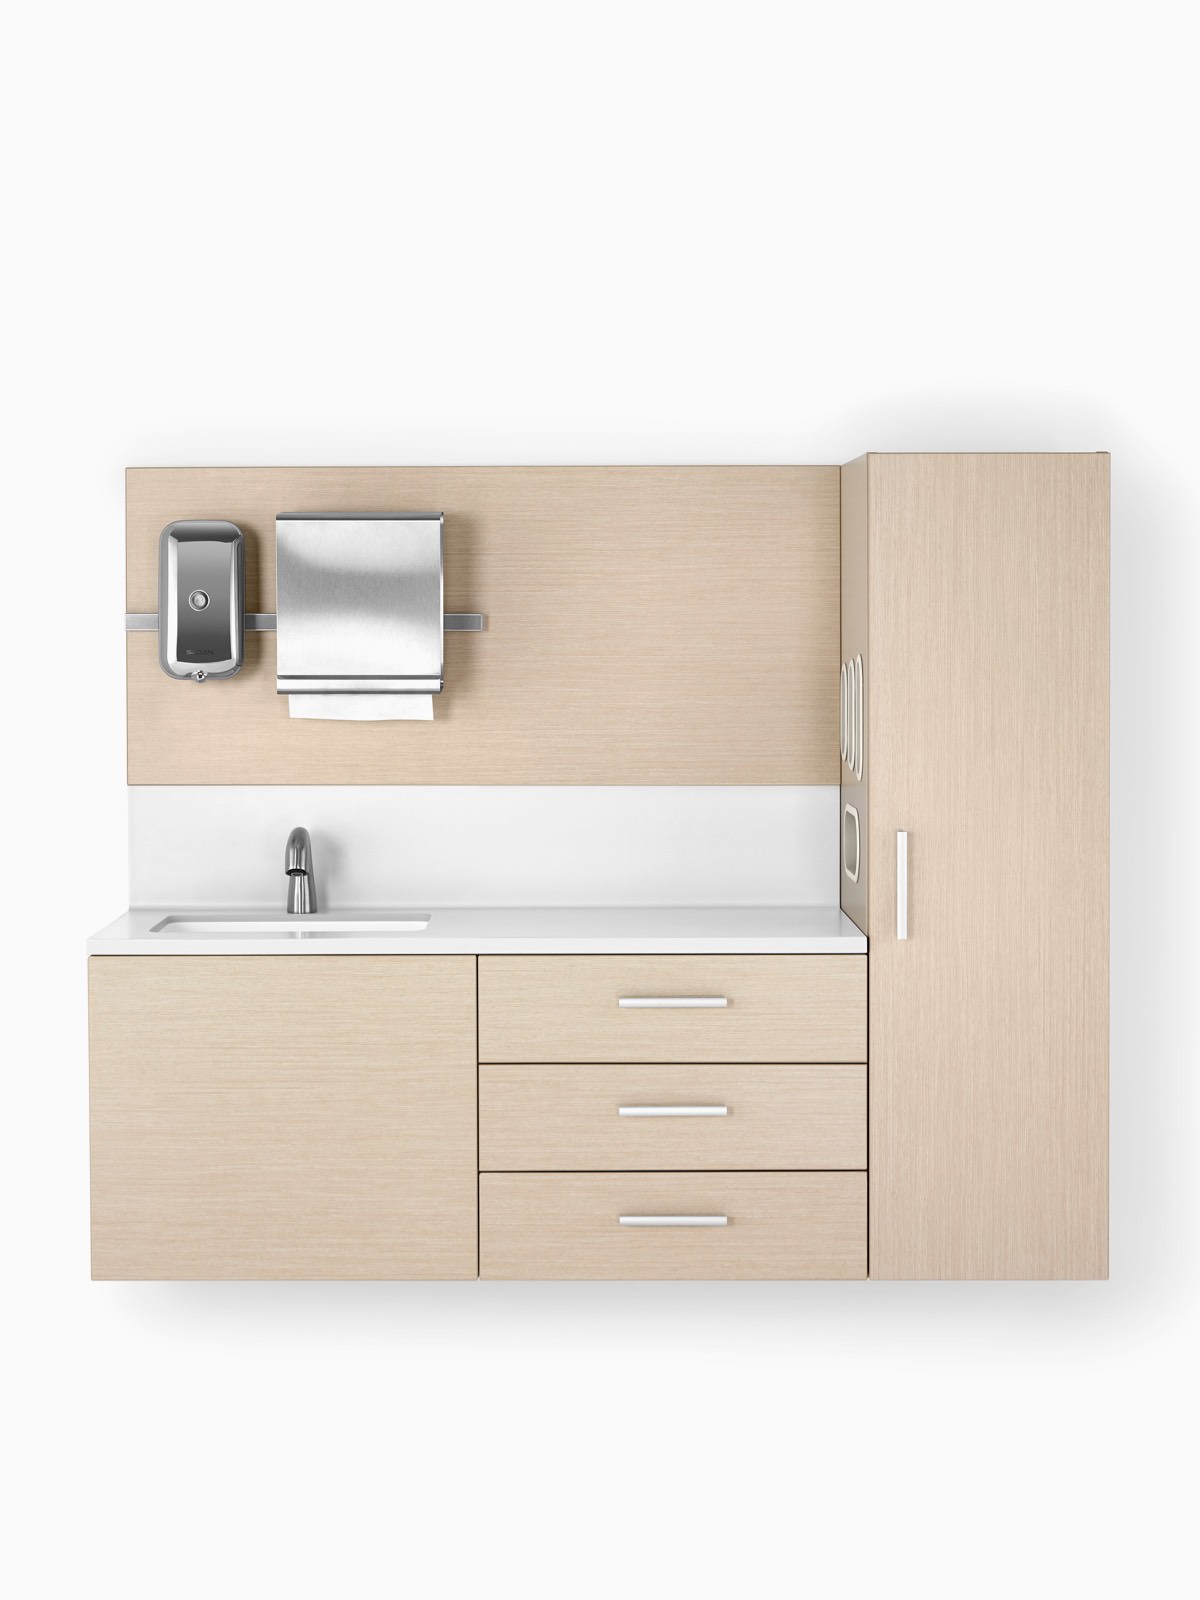 Mora System casework in an ash finish with a white solid surface and integrated sink.